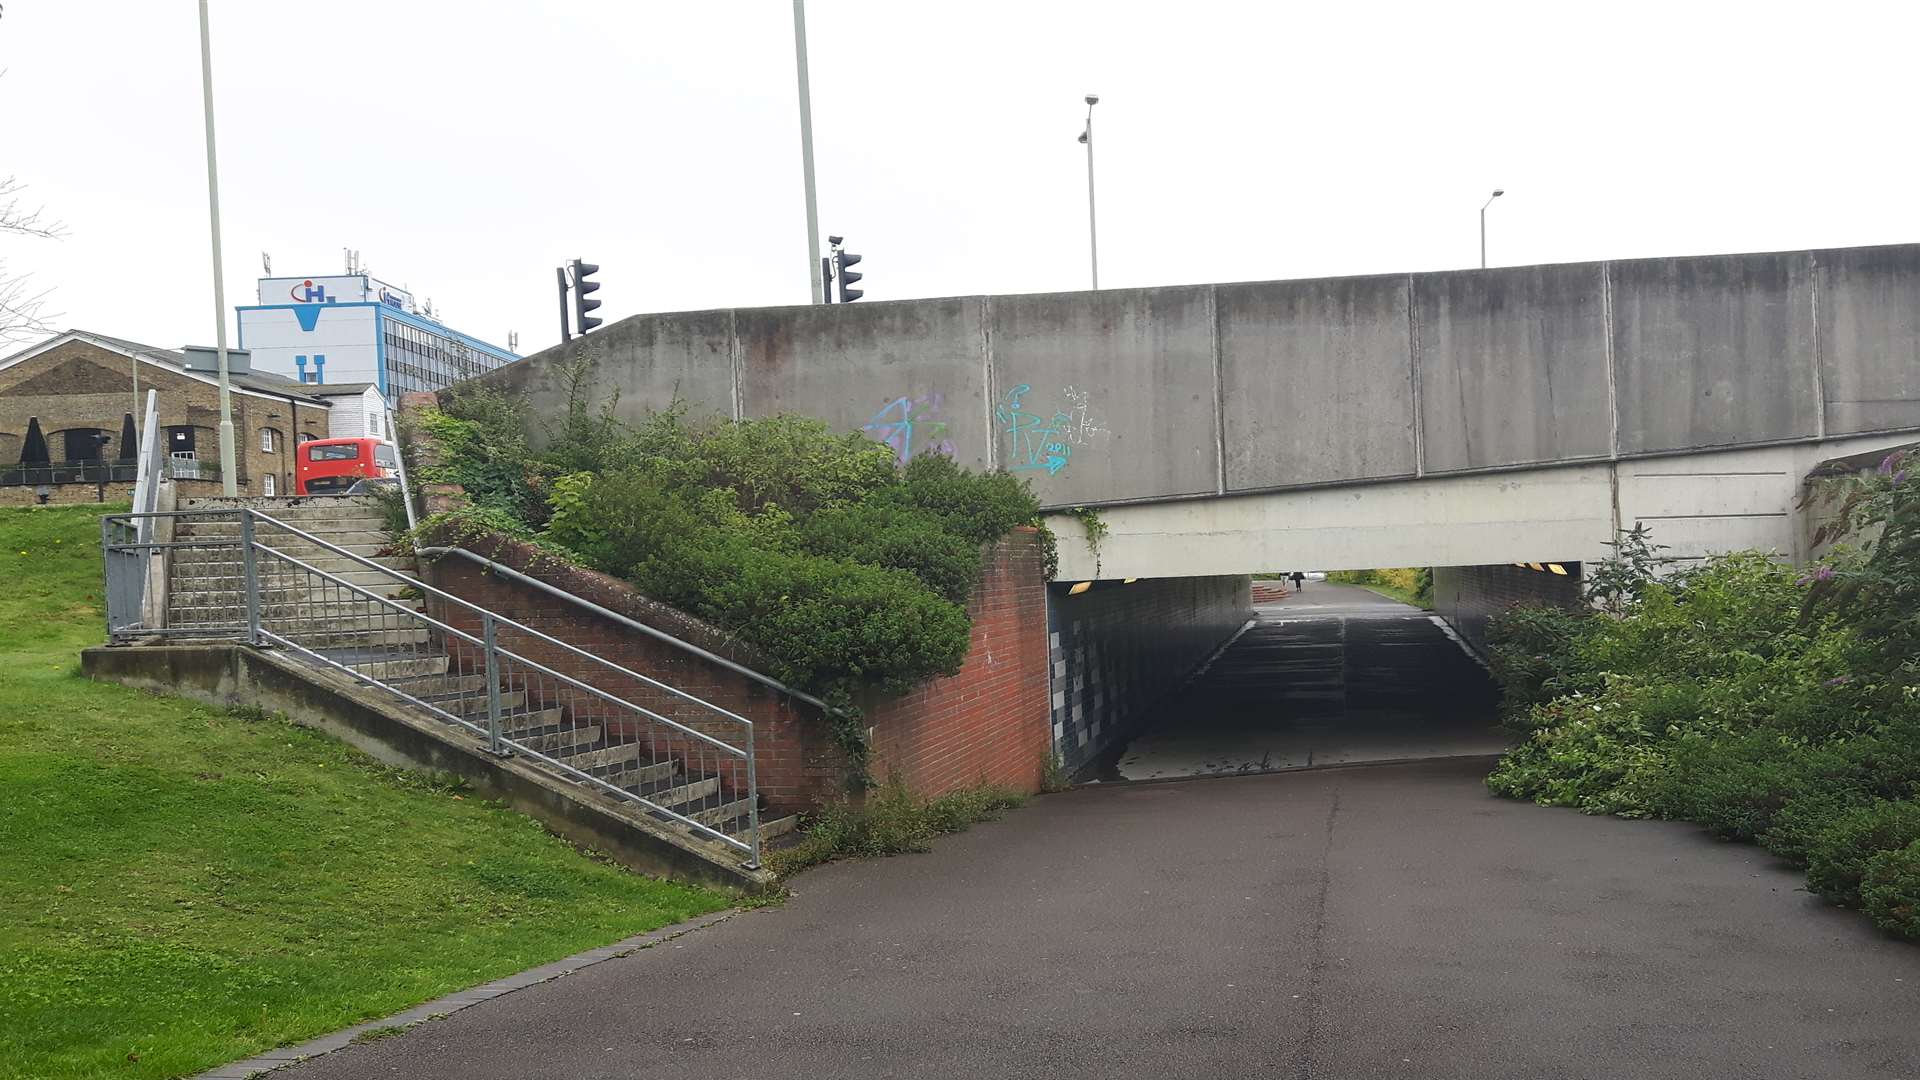 The underpass beneath Station Road